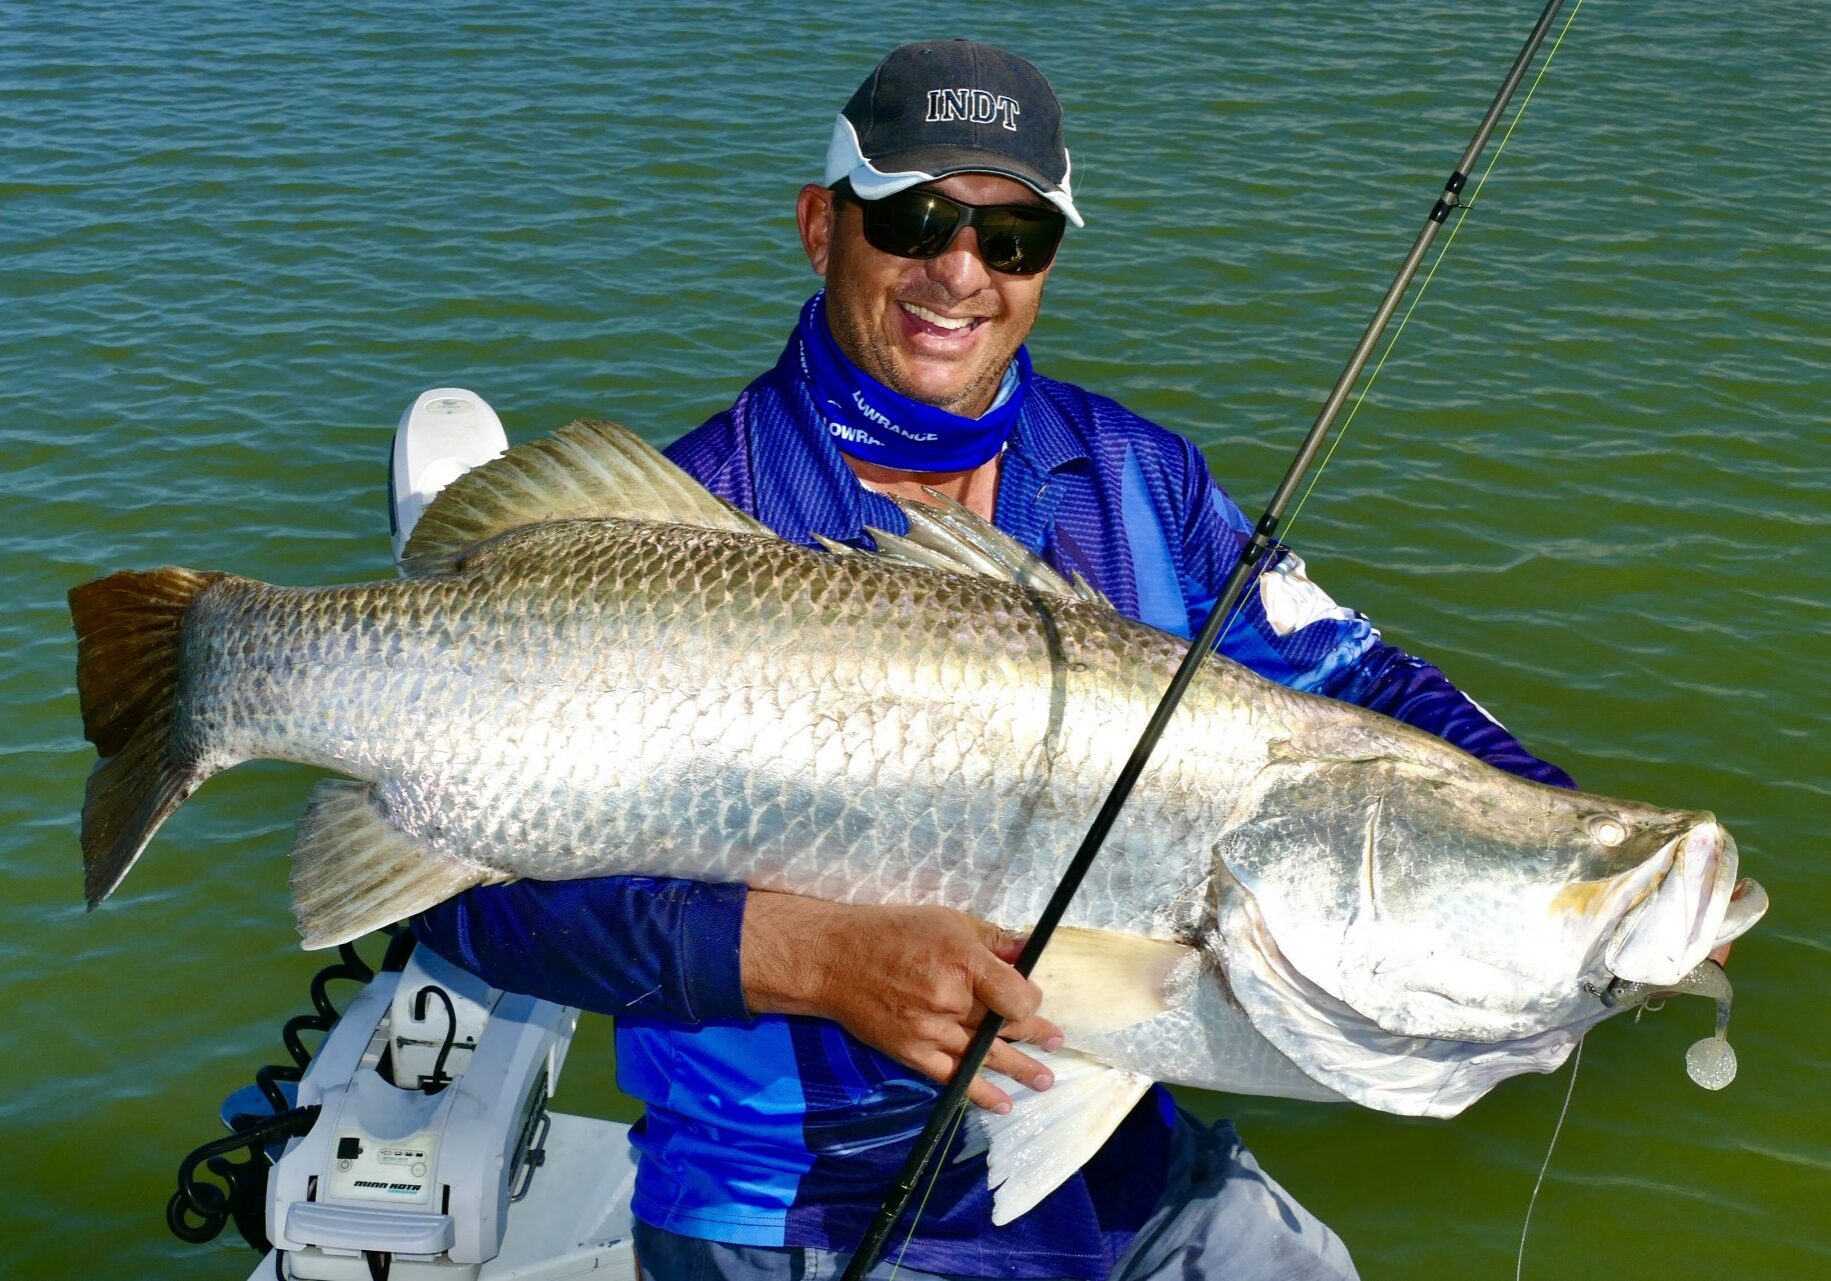 Barra specalist Mick Slade with an impressive 128cm Barra caught in the Fitzroy River.